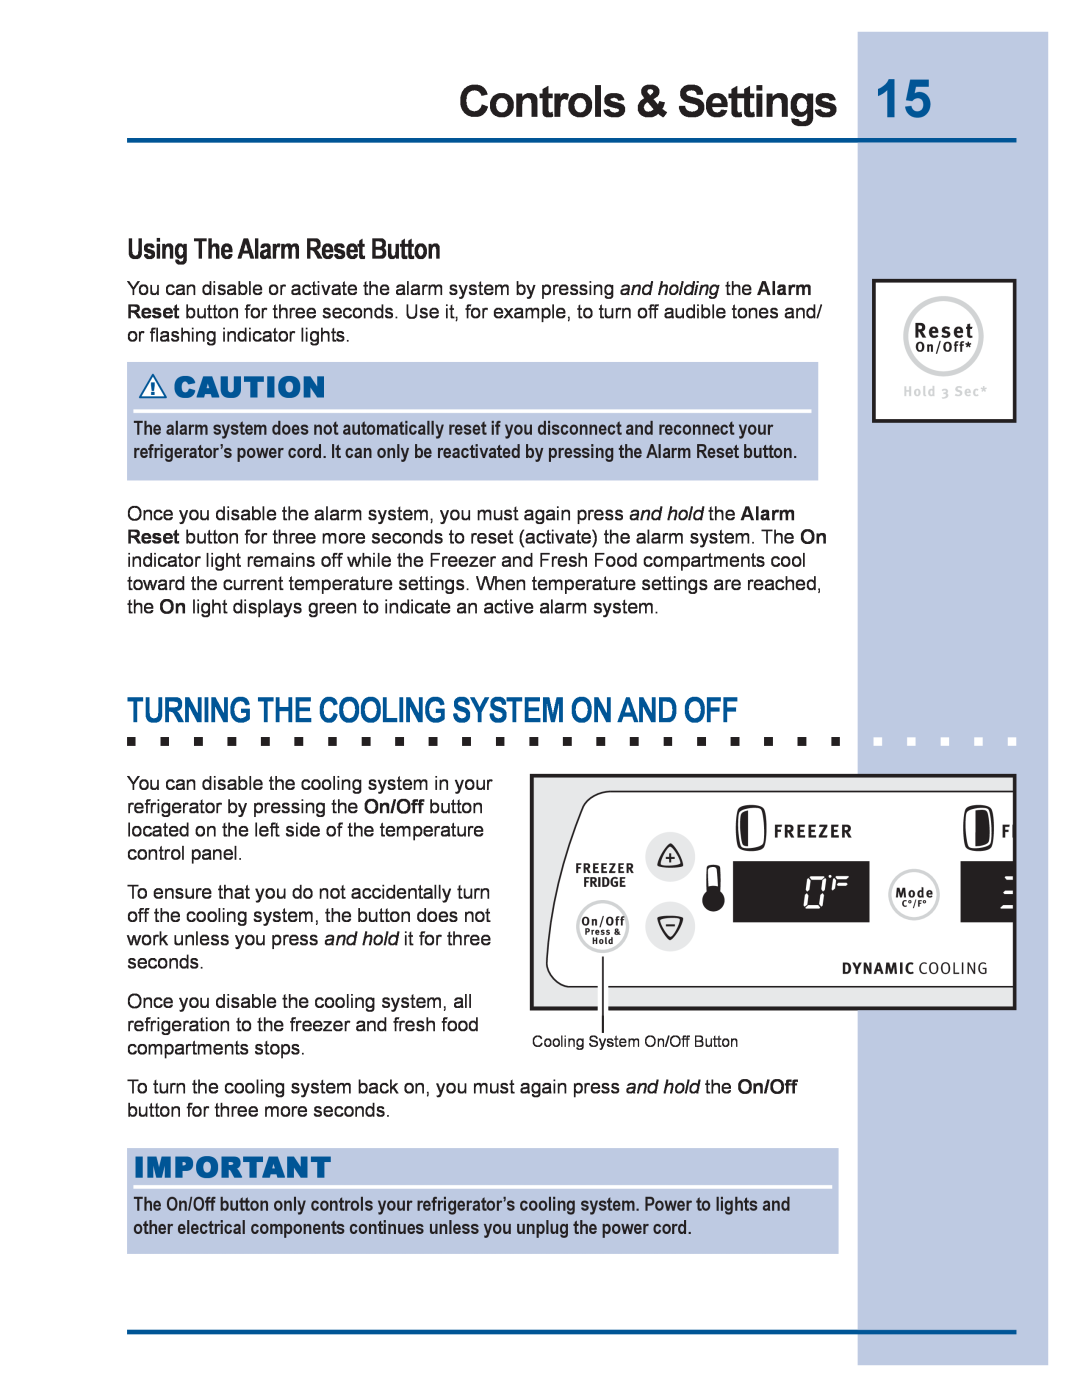 Electrolux 241540102 manual Turning The Cooling System On And Off, Using The Alarm Reset Button, Controls & Settings 